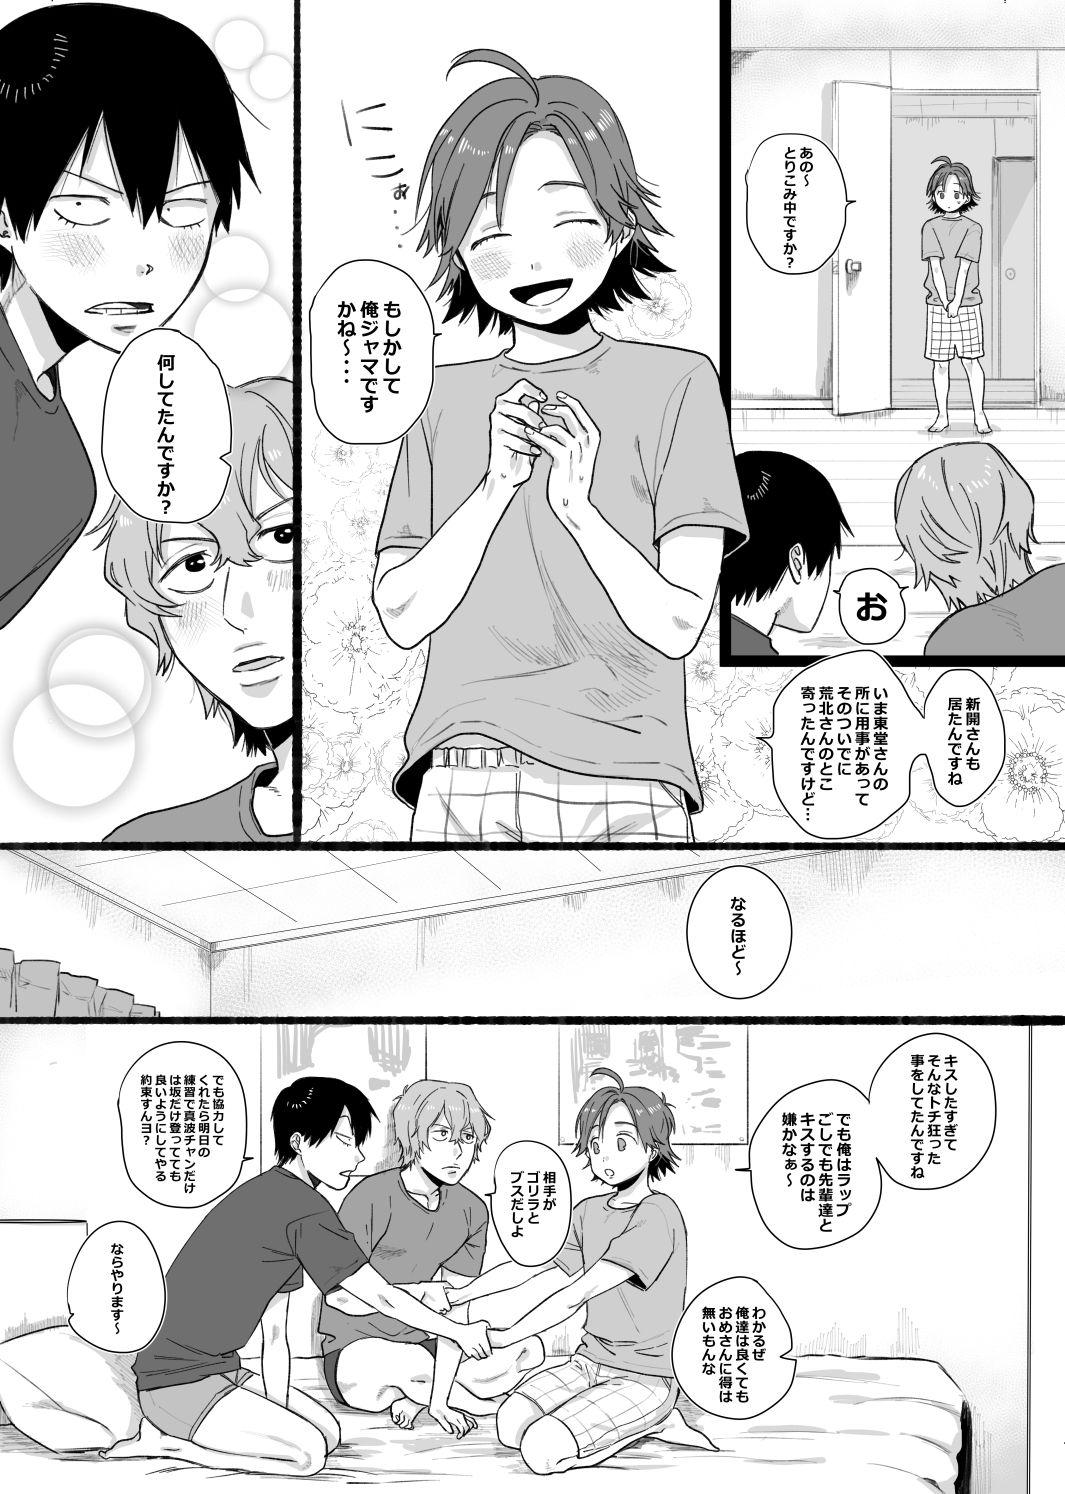 Married No Count - Yowamushi pedal Bare - Page 5